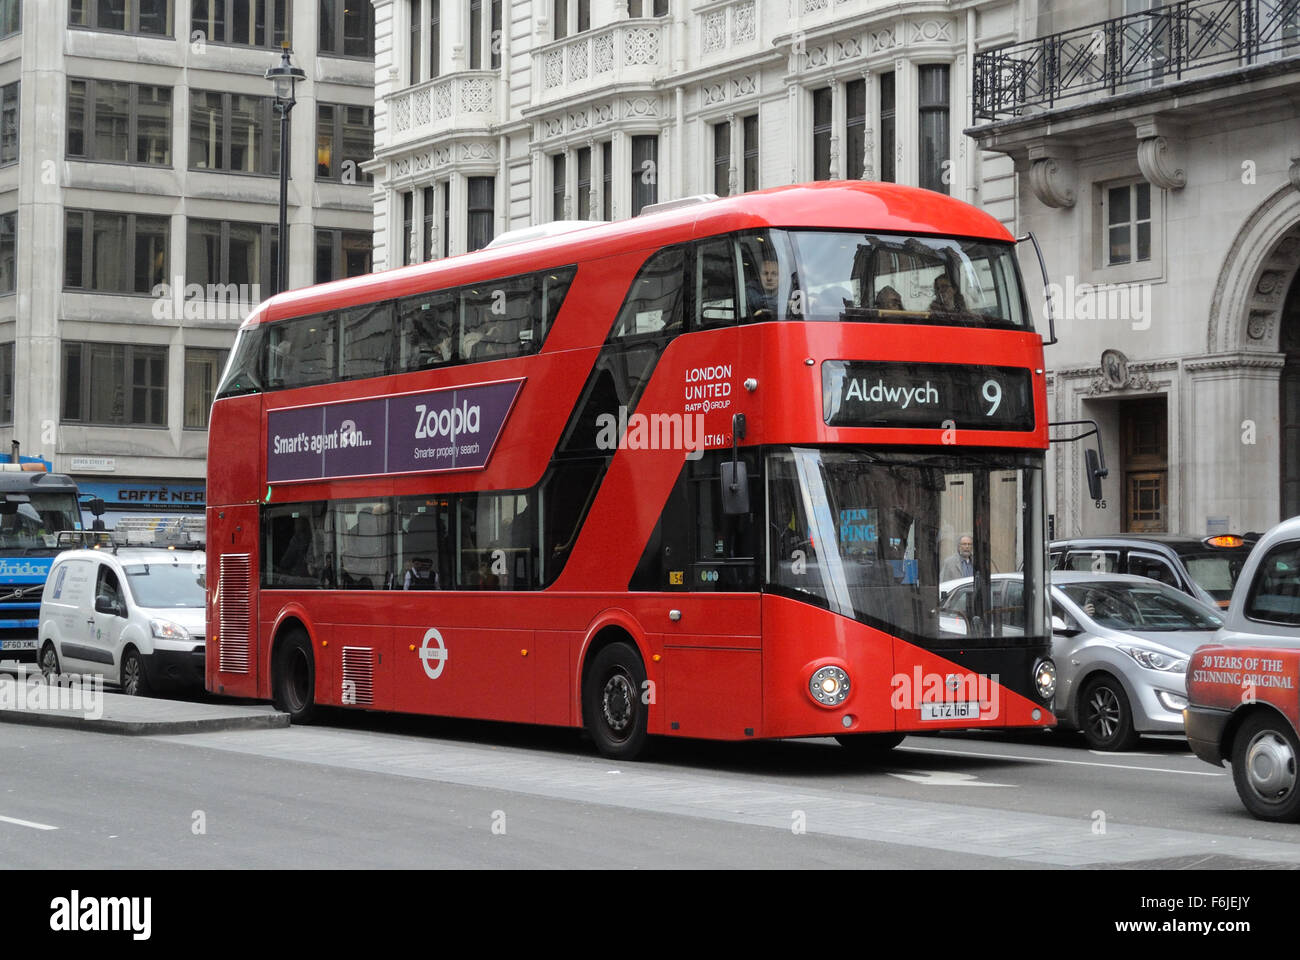 A traditional double decker Routemaster bus navigates traffic in Piccadilly, central London, England - 2015 Stock Photo